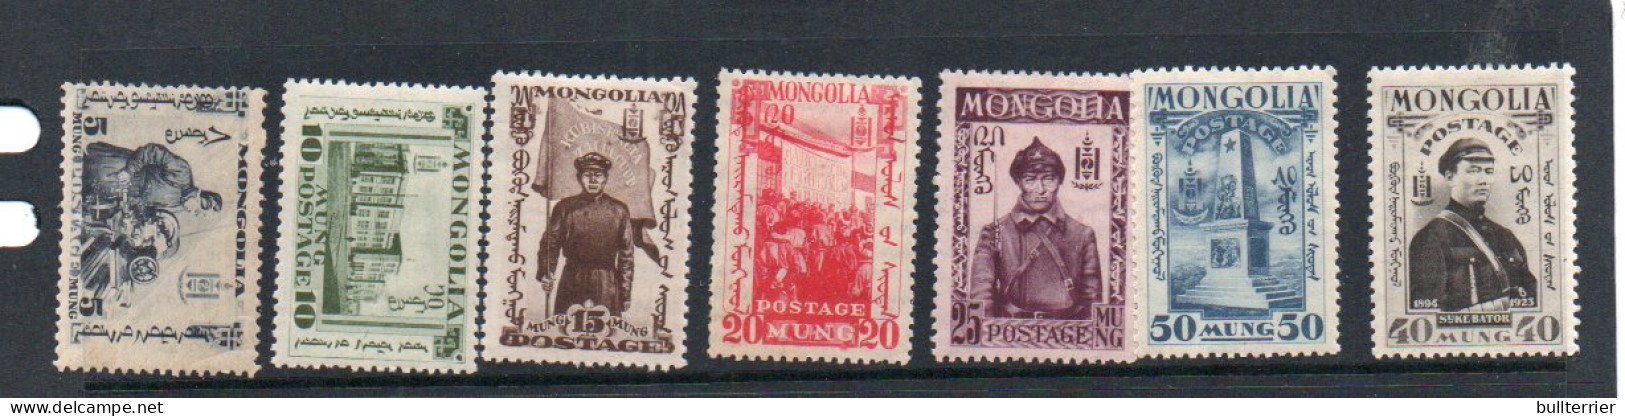 MONGOLIA - 1932 -  5MON TO 50MON MINT HINGED - VERY FINE, SELDOM OFFERED SET ,SG £22 - Mongolie